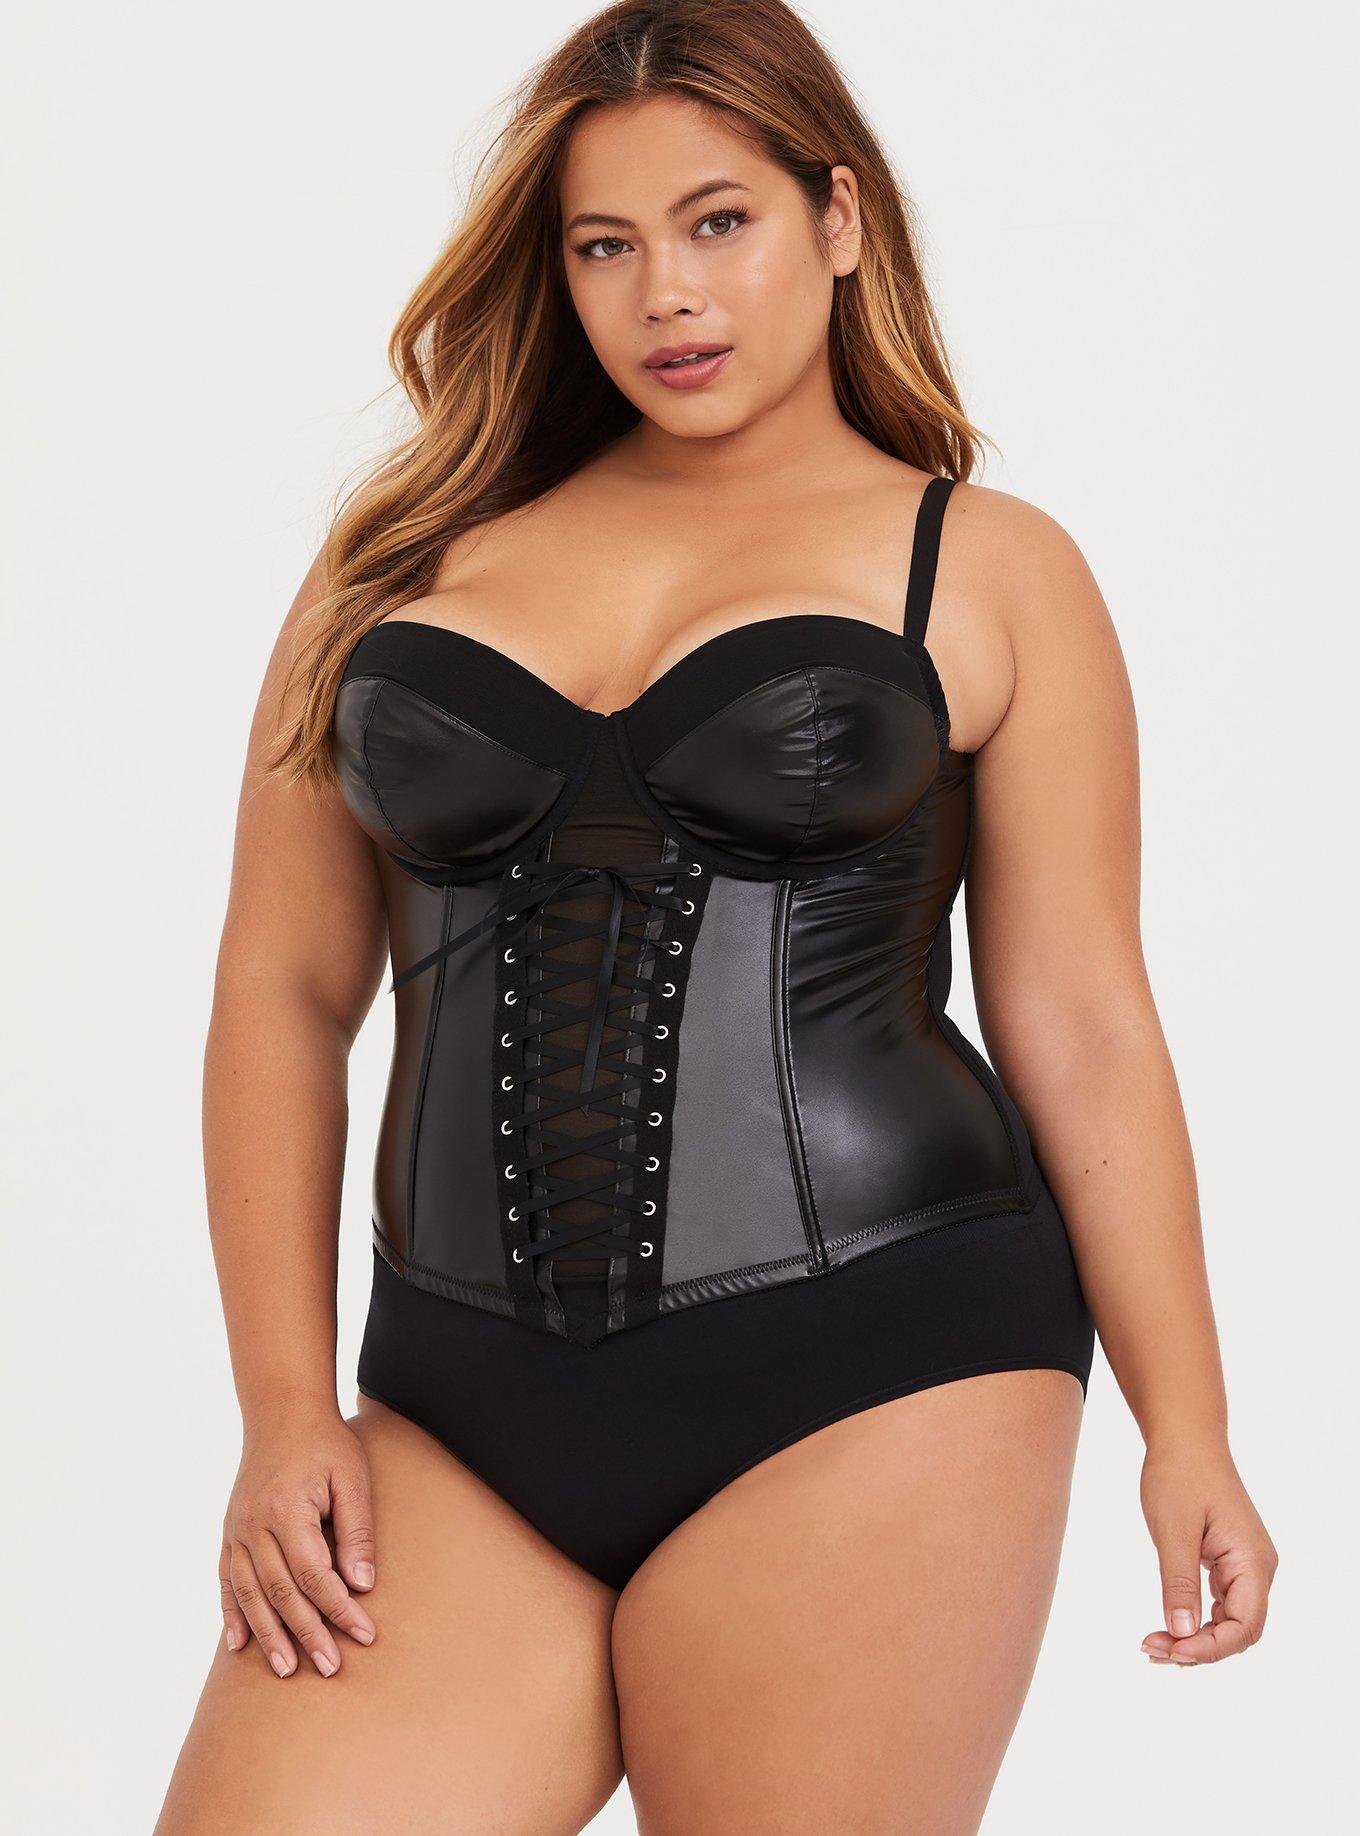 Leather corset top Large $55